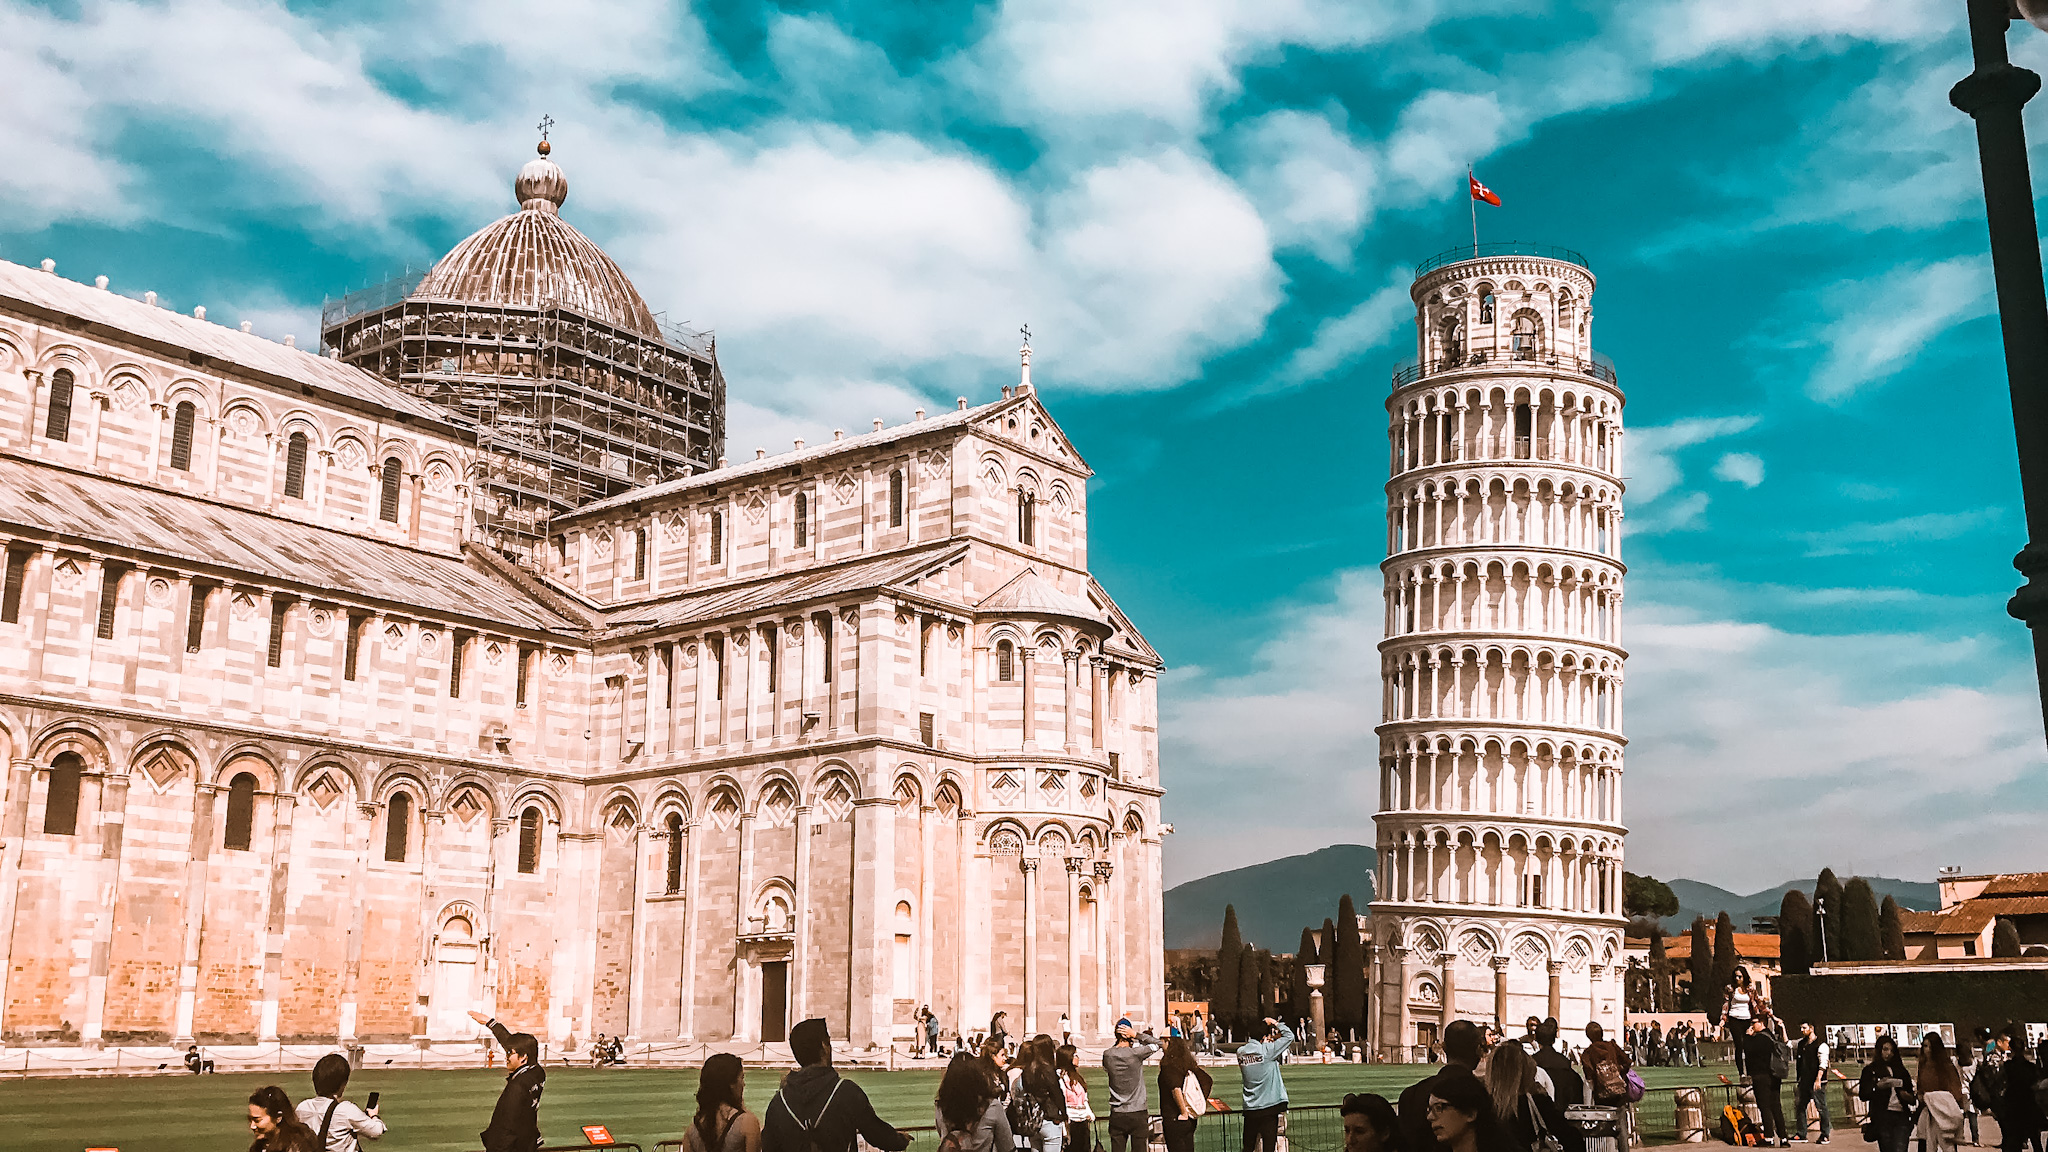 The Leaning Tower of Pisa and the Cathedral of Pisa gather large crowds around it